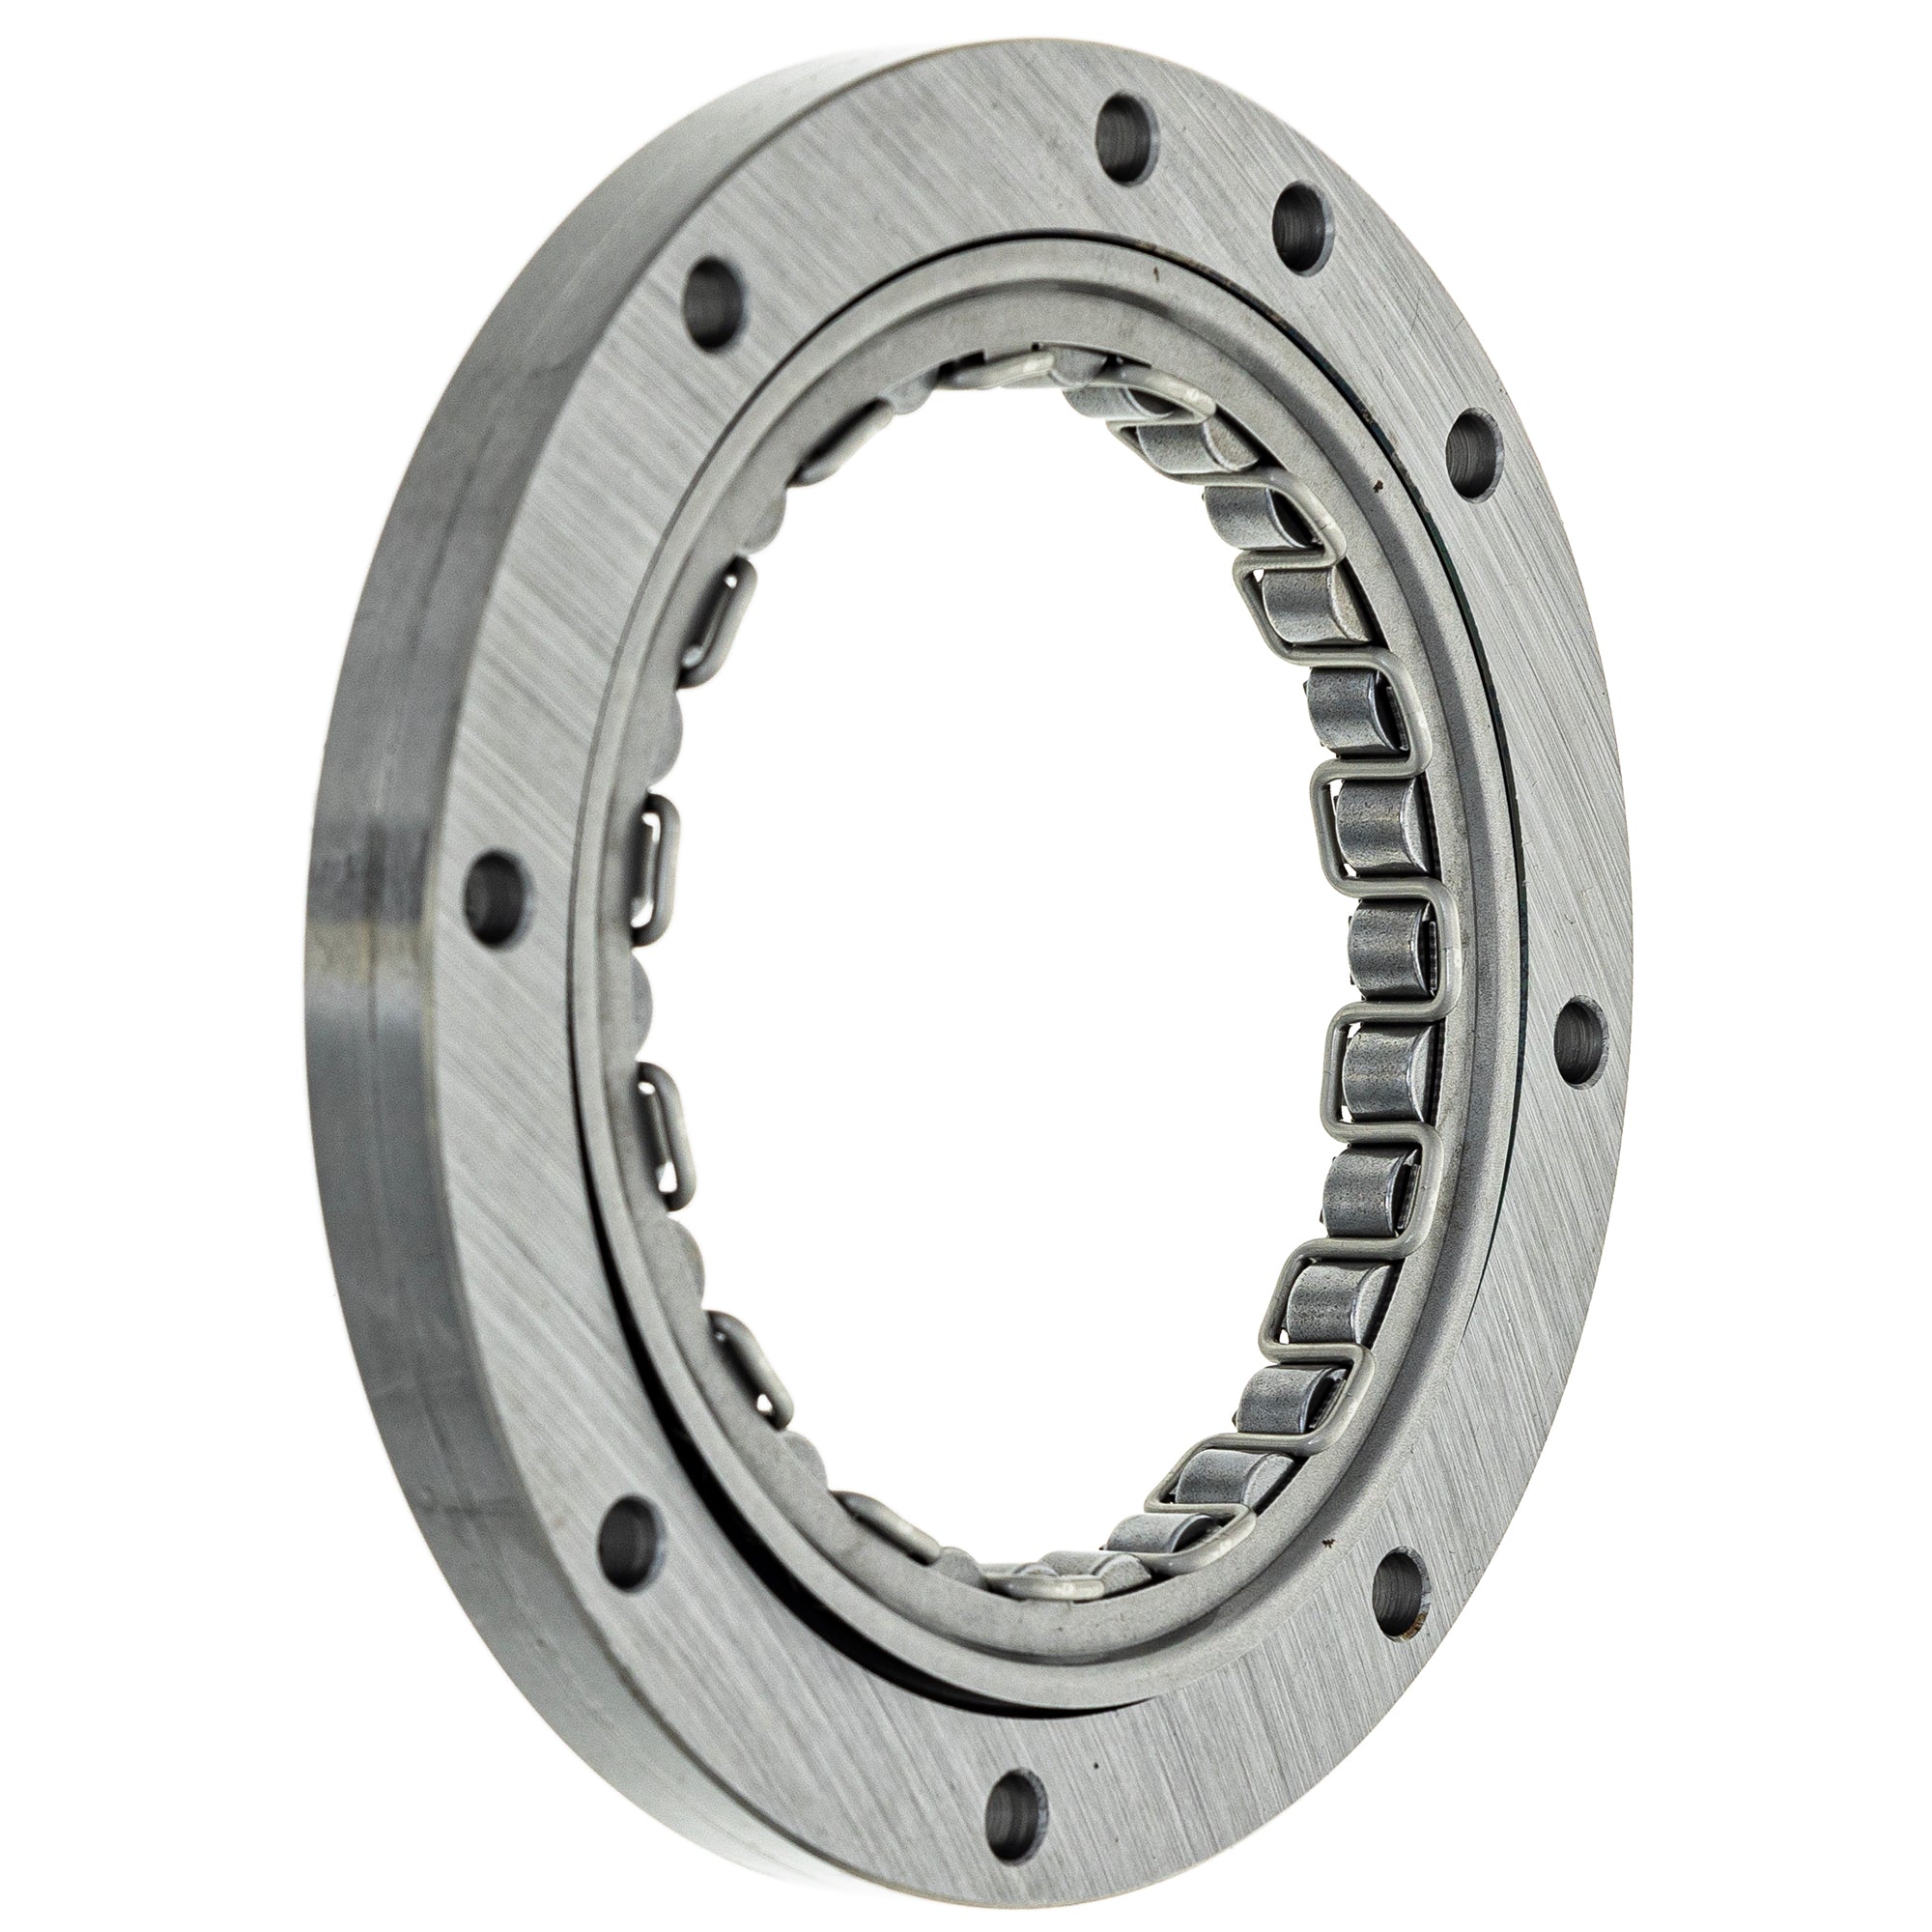 Starter Clutch One-Way Bearing Assembly 519-CSC2220O For Yamaha 99999-03908-00 5EL-15590-00-00